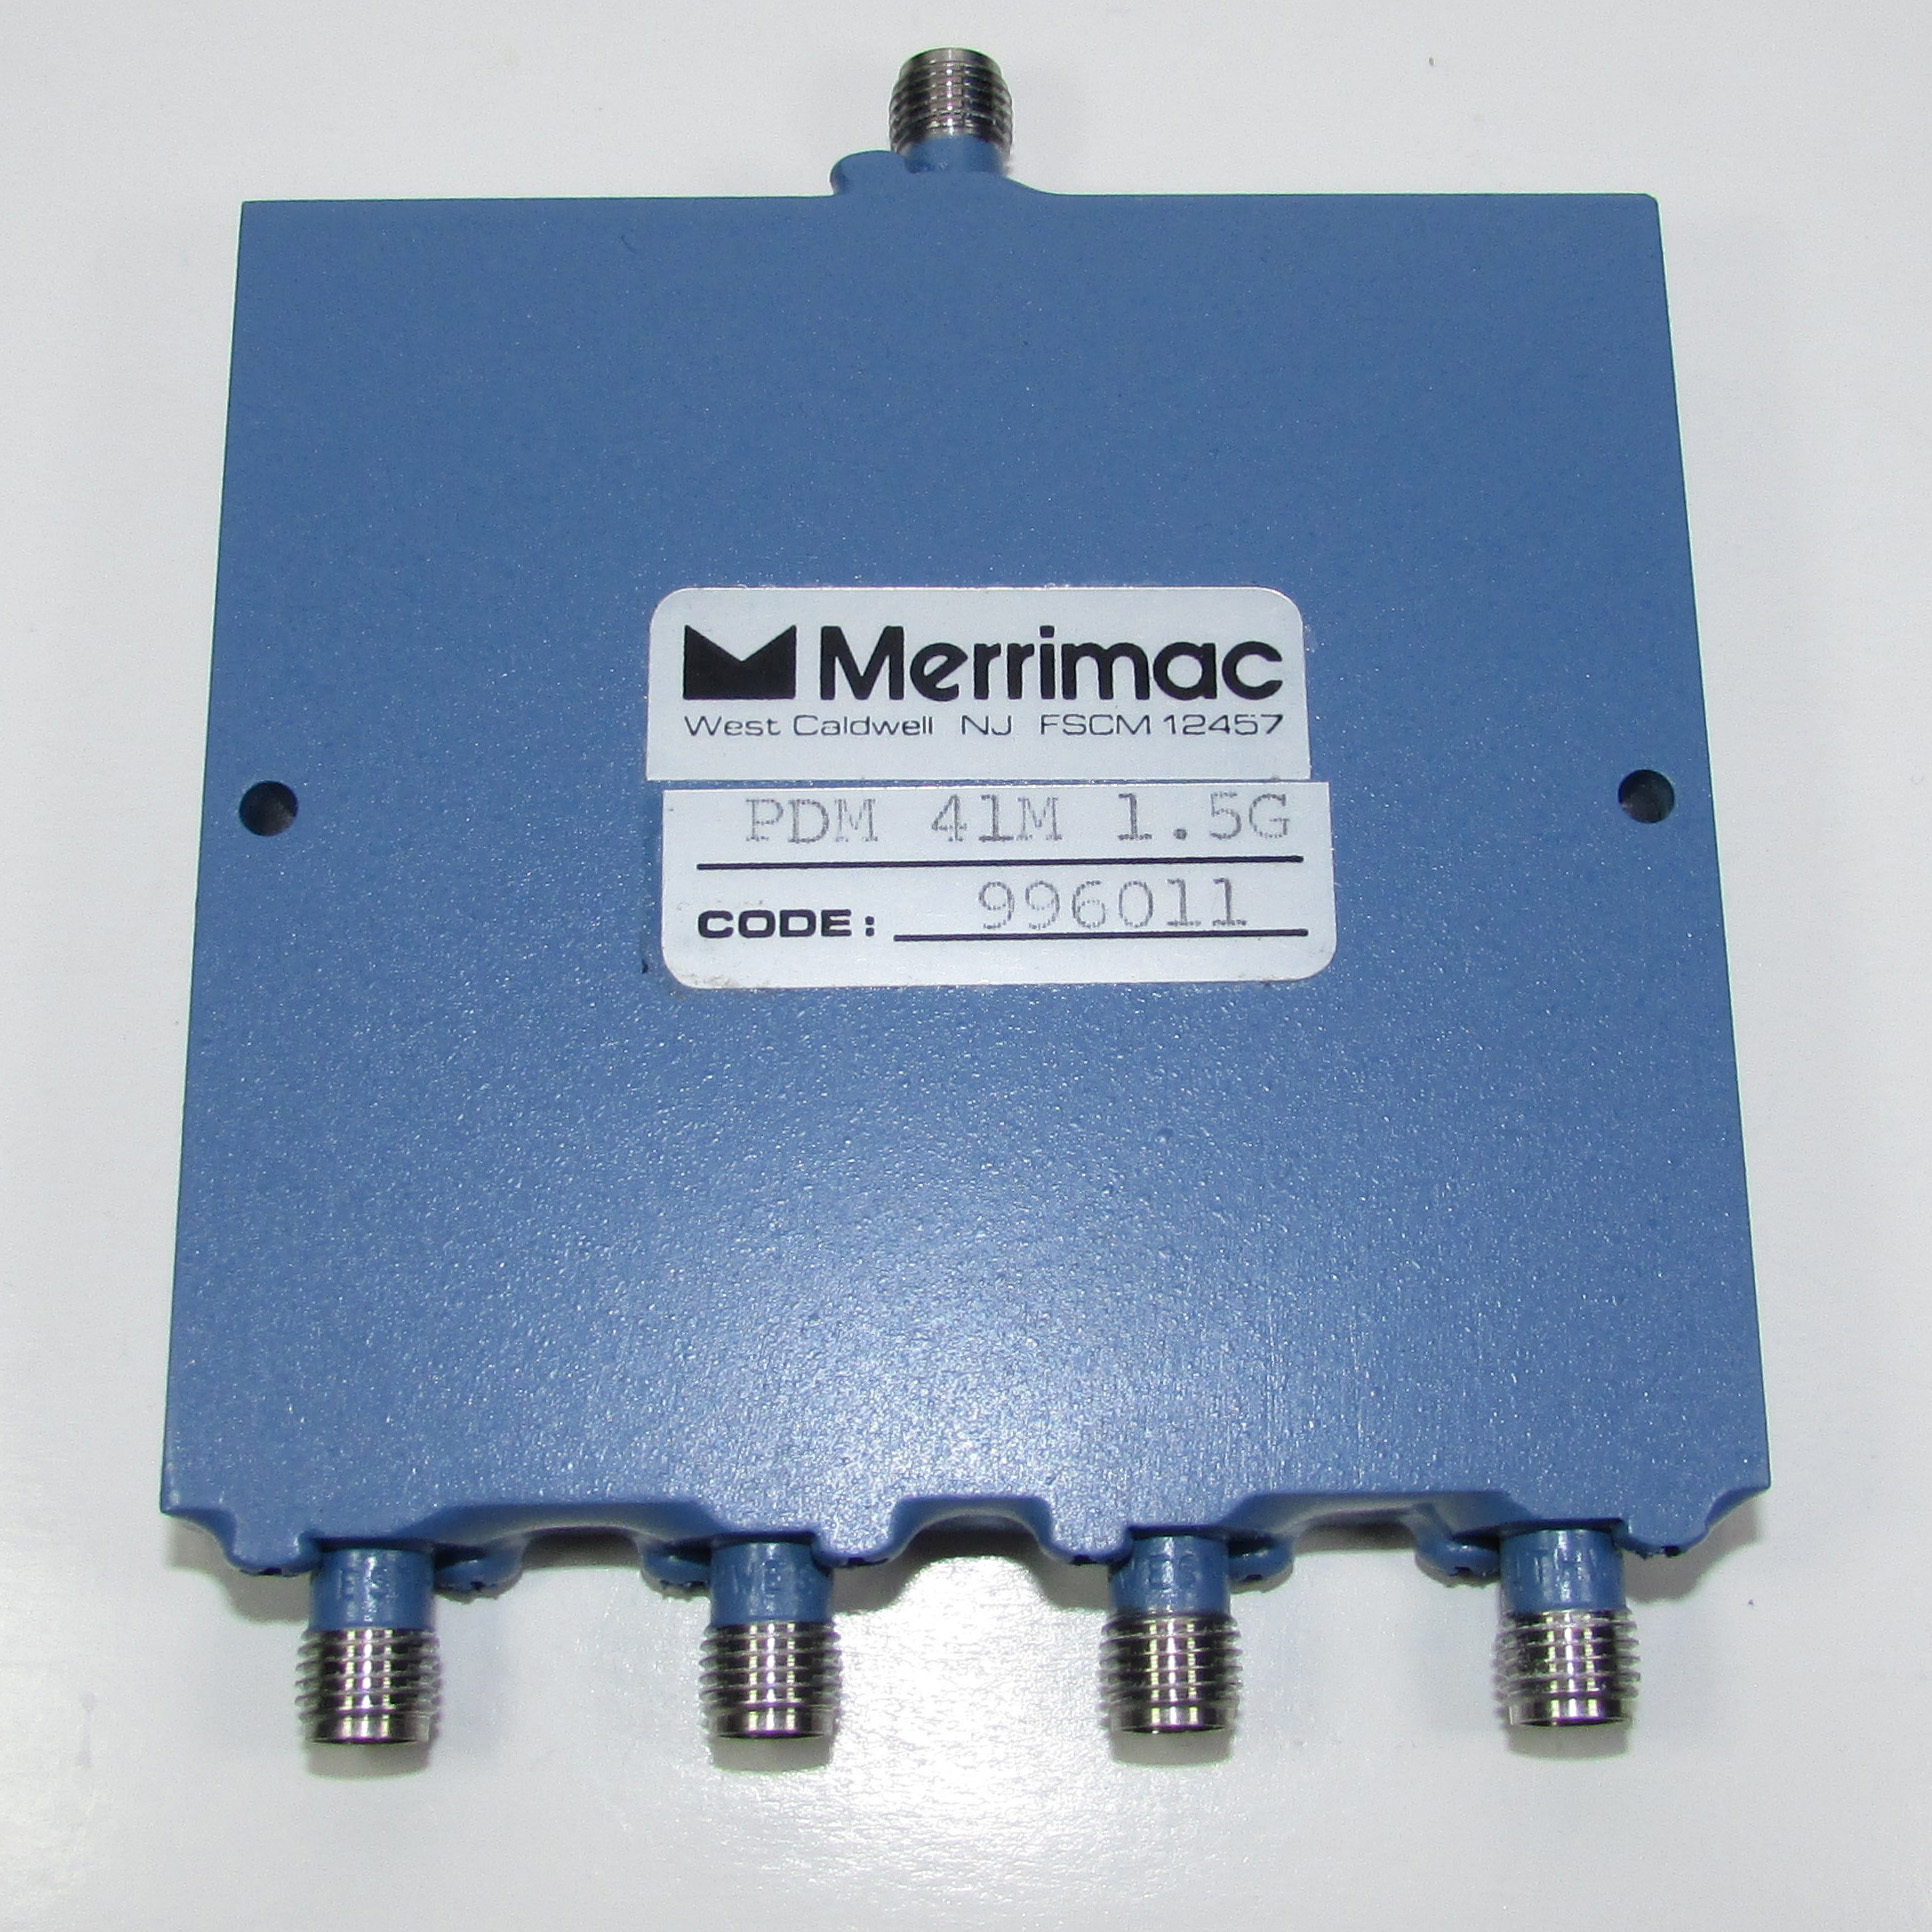 Merrimac PDM-41M-1.5G 1-2GHz SMA RF Microwave One Point Four Power Divider